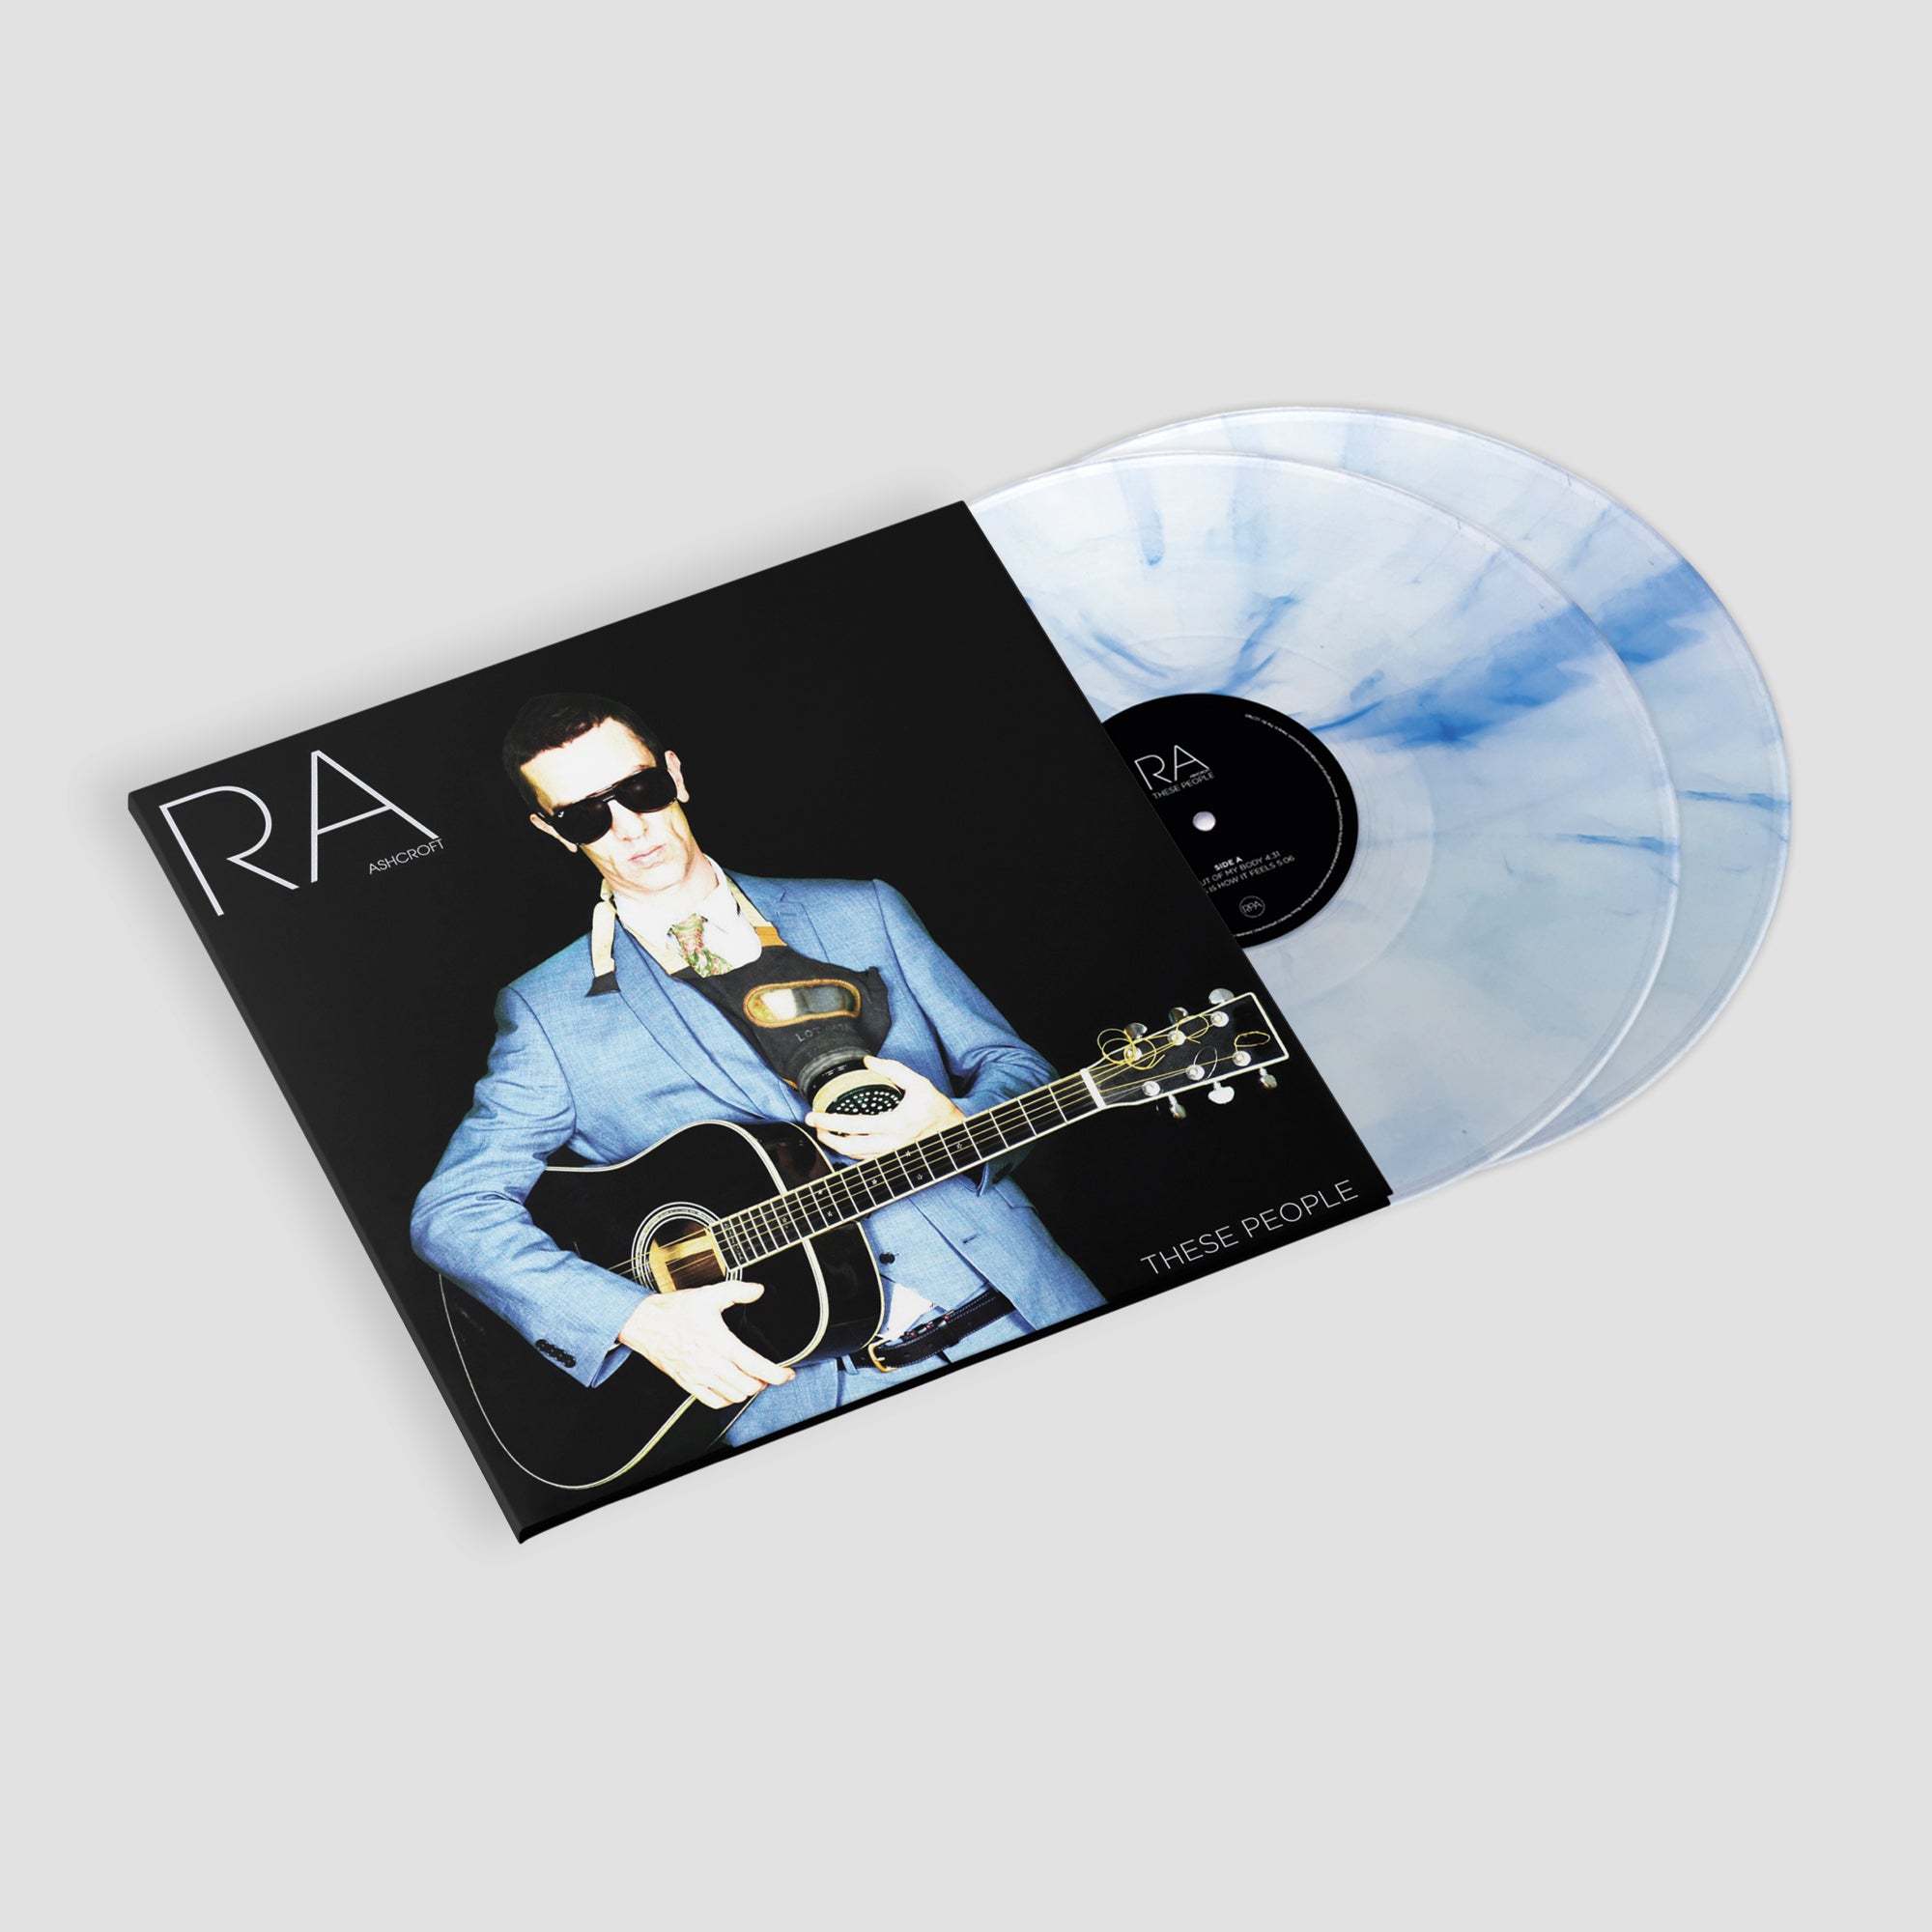 Richard Ashcroft - These People: Clear Blue Marbled Vinyl 2LP